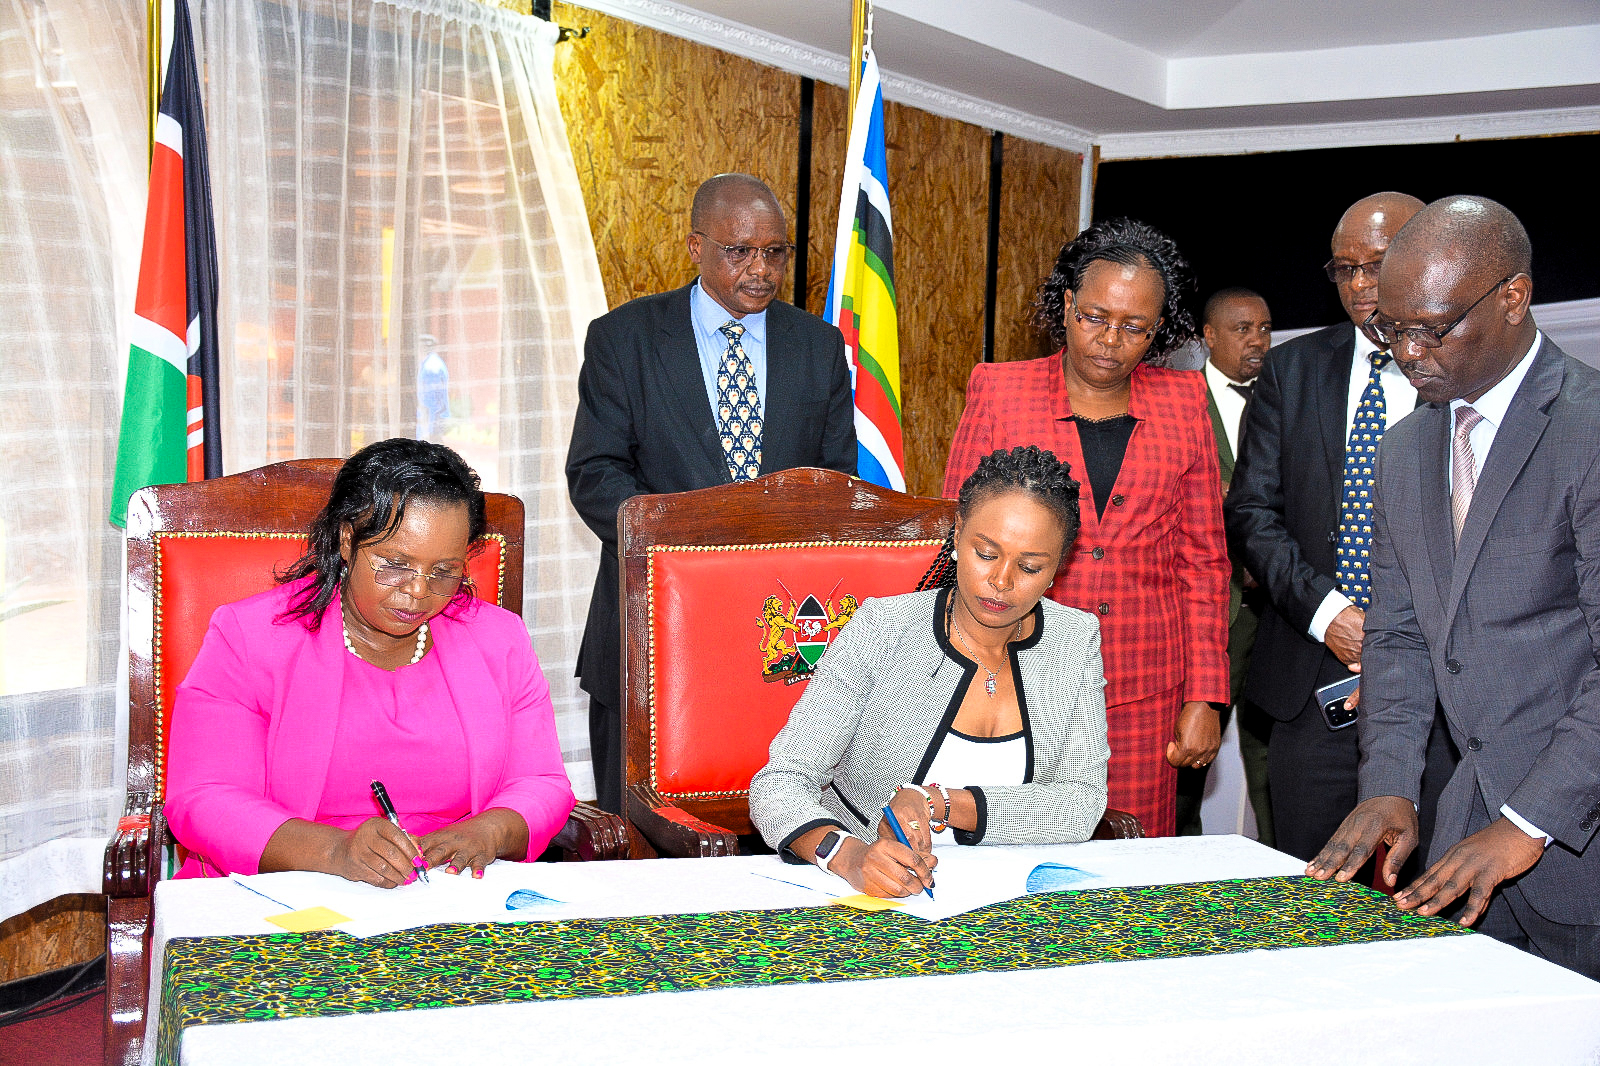 The Cabinet Secretary, Hon. Peninah Malonza, signing the performance contract for the financial year 2023/2024 with the Principal Secretary State Department for Wildlife, Ms. Silvia Museiya.